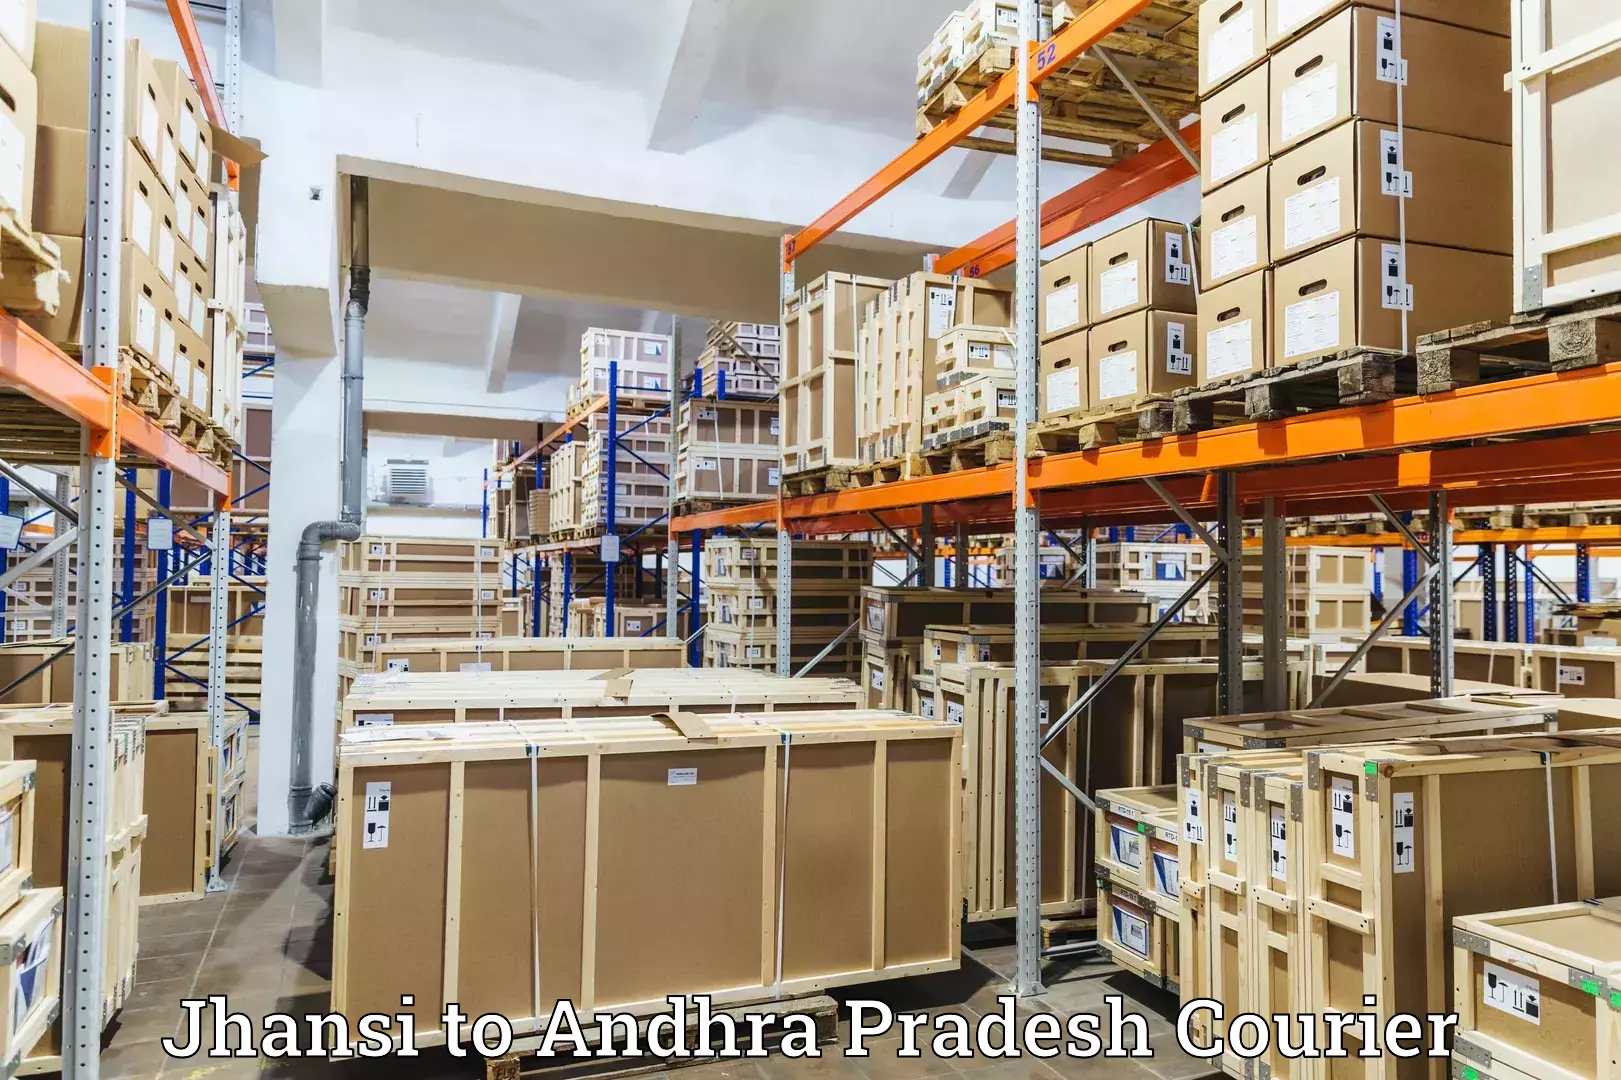 Courier service comparison in Jhansi to Andhra Pradesh